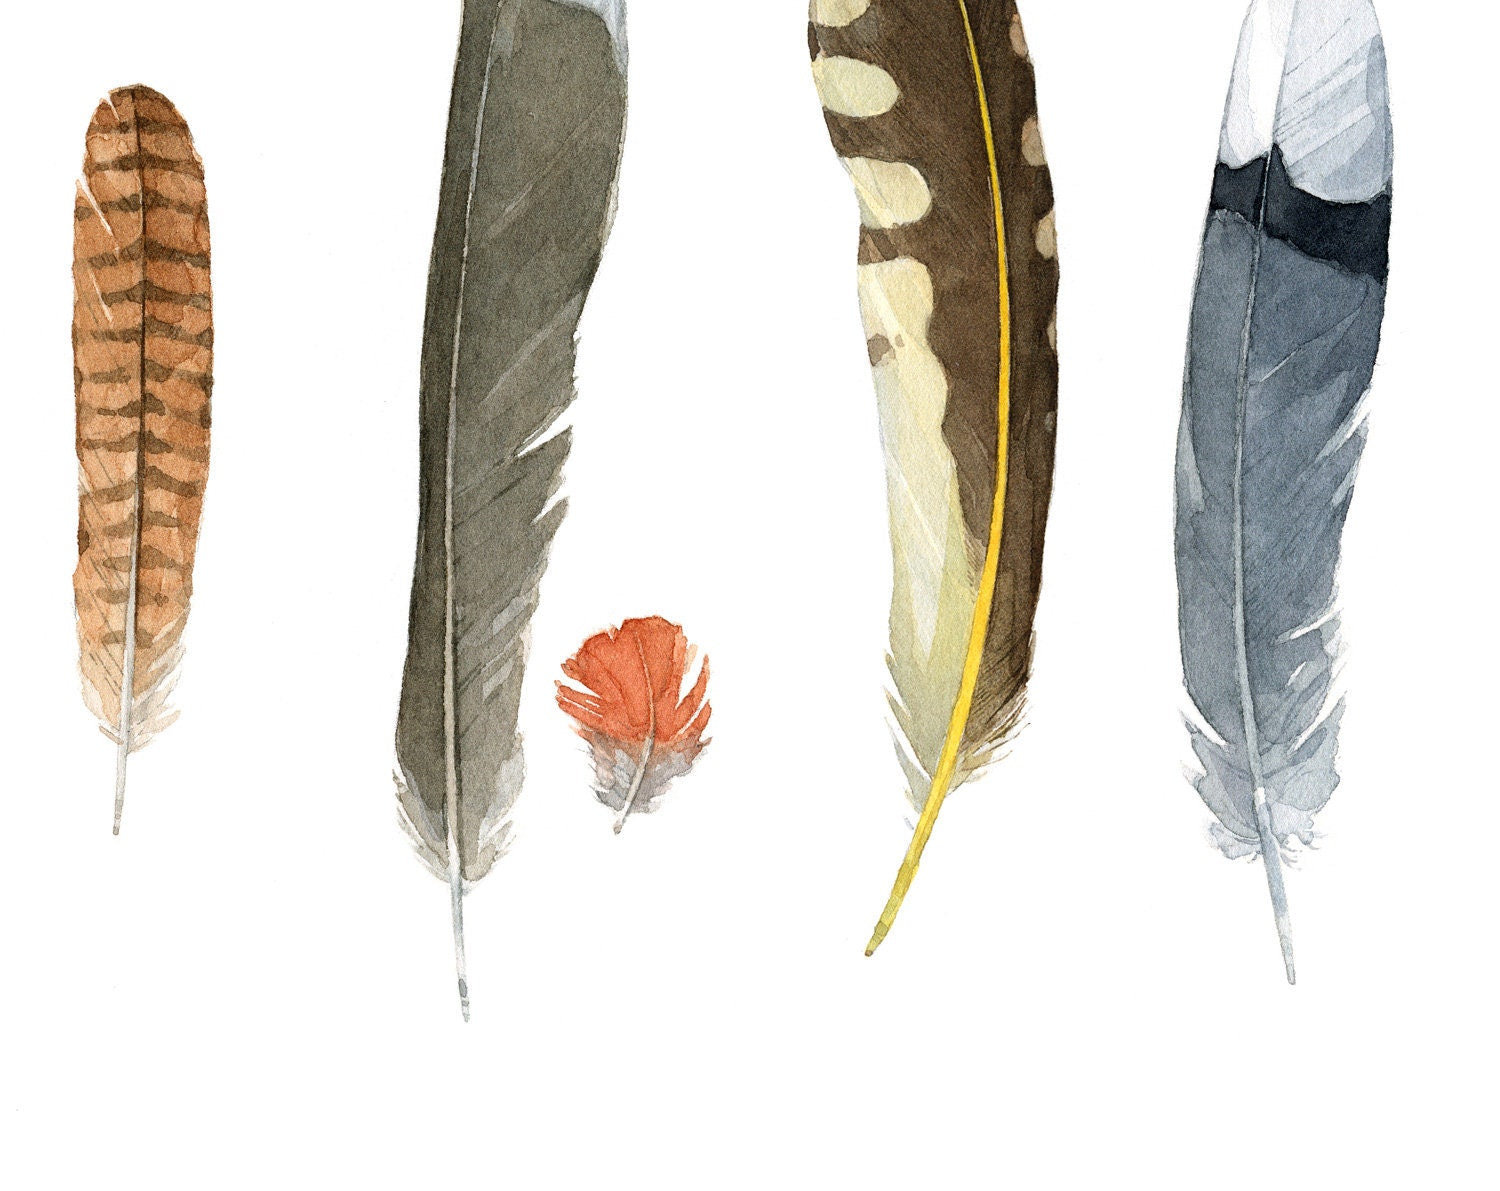 hawk feather drawing